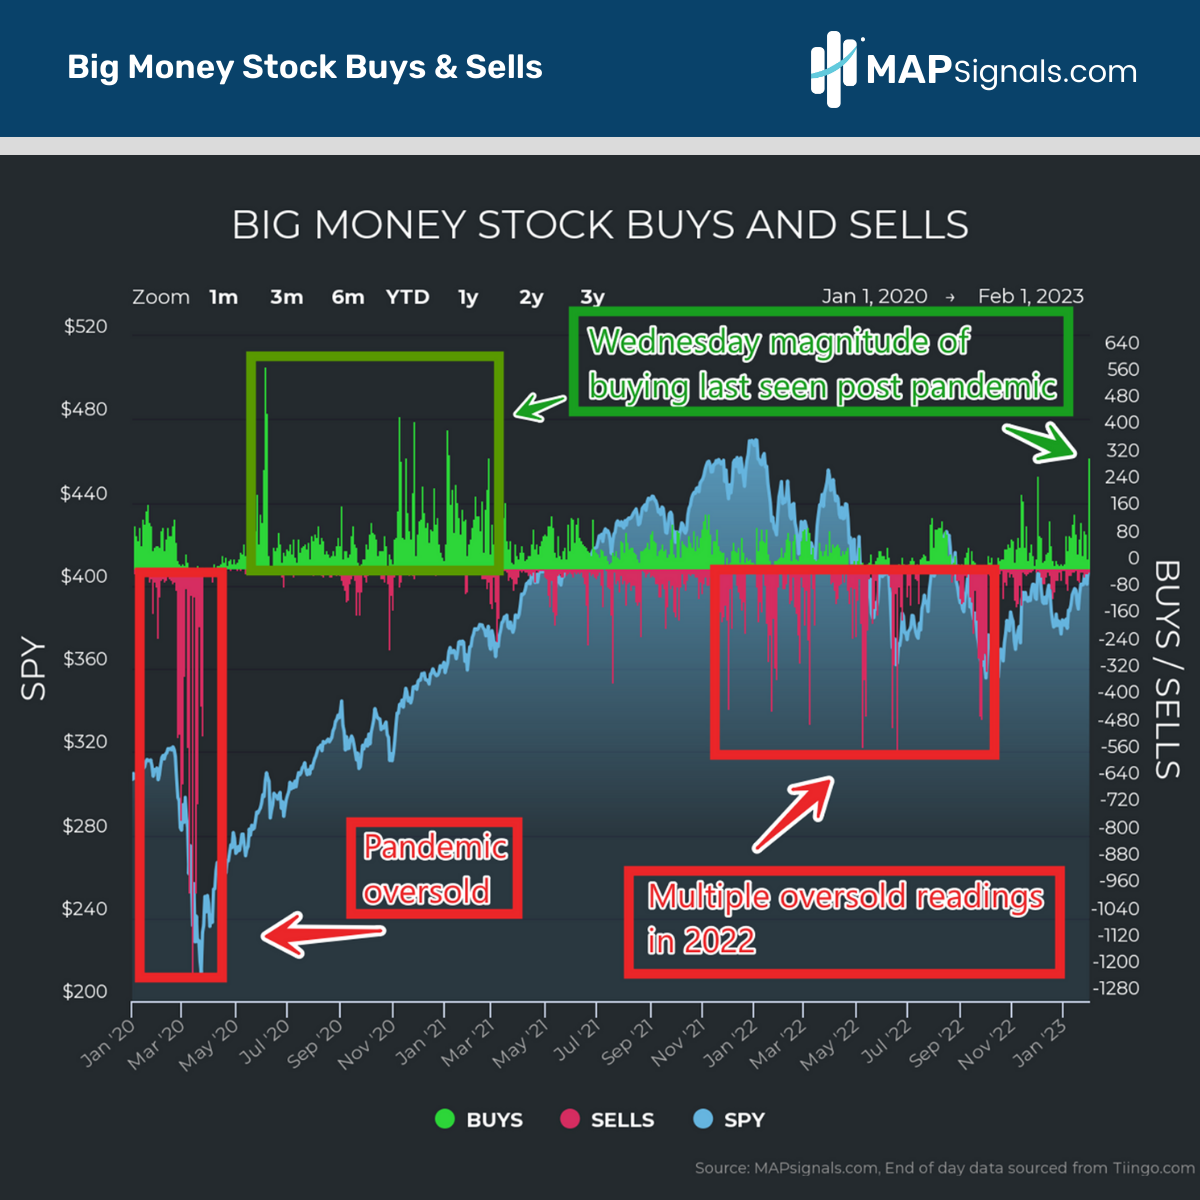 Largest buying seen since post pandemic | Big Money Stock Buys & Sells